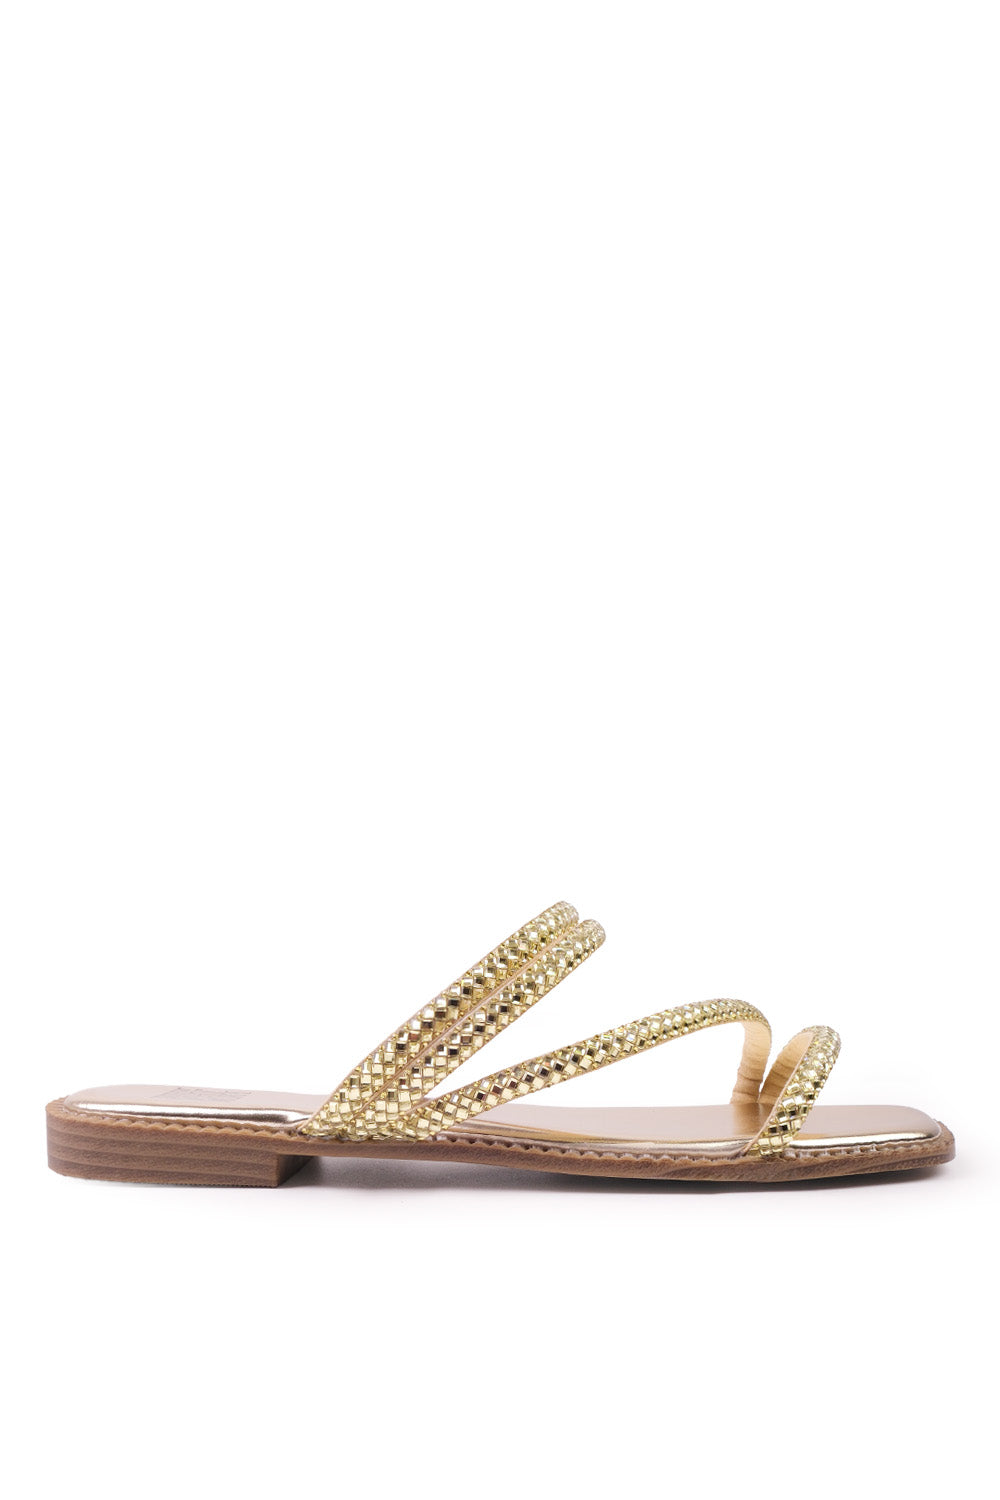 DREAM EXTRA WIDE STRAPPY FLAT SLIDER SANDALS WITH DIAMANTE DETAIL IN GOLD FAUX LEATHER